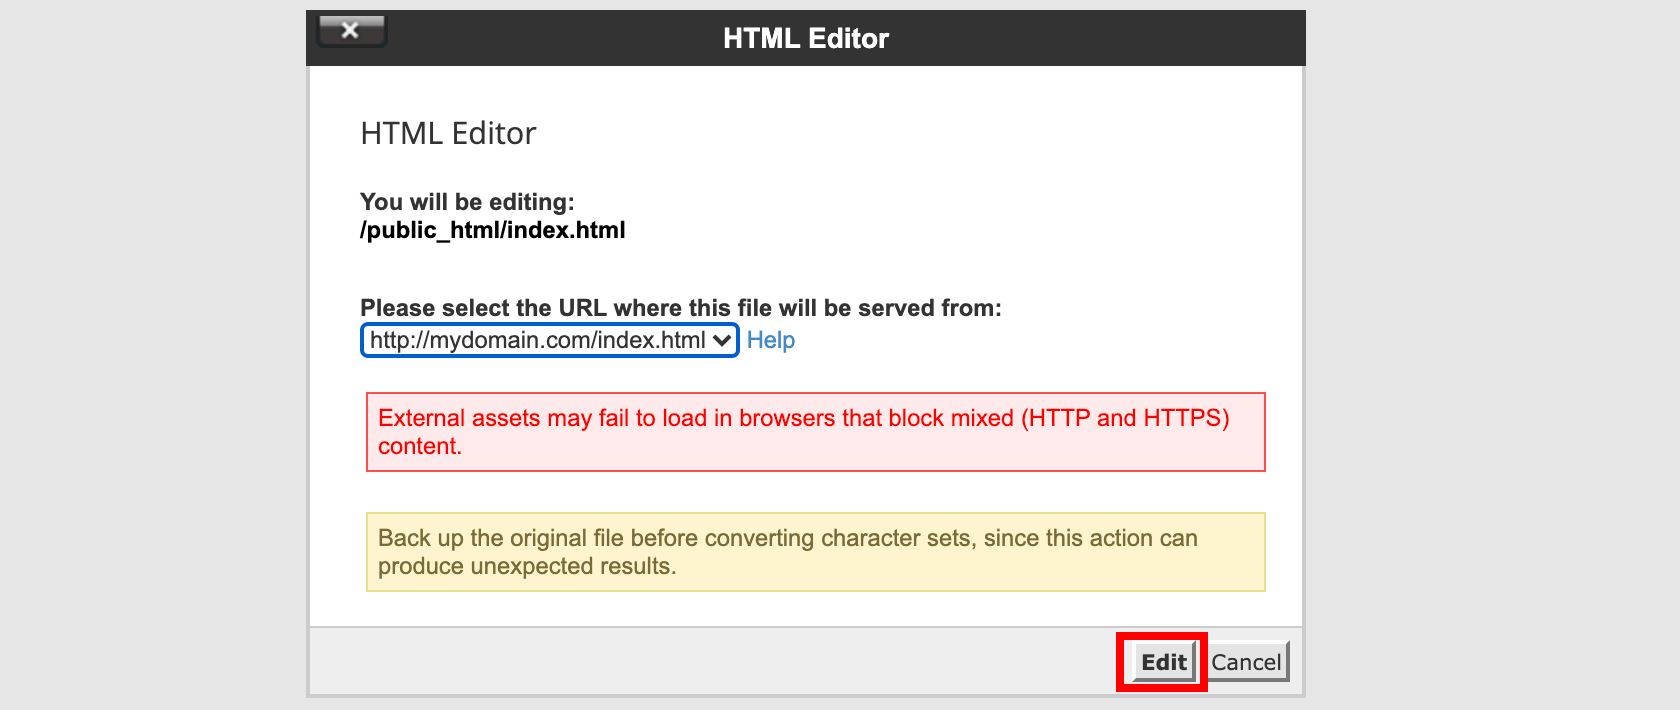 Pop-up window for HTML editor file